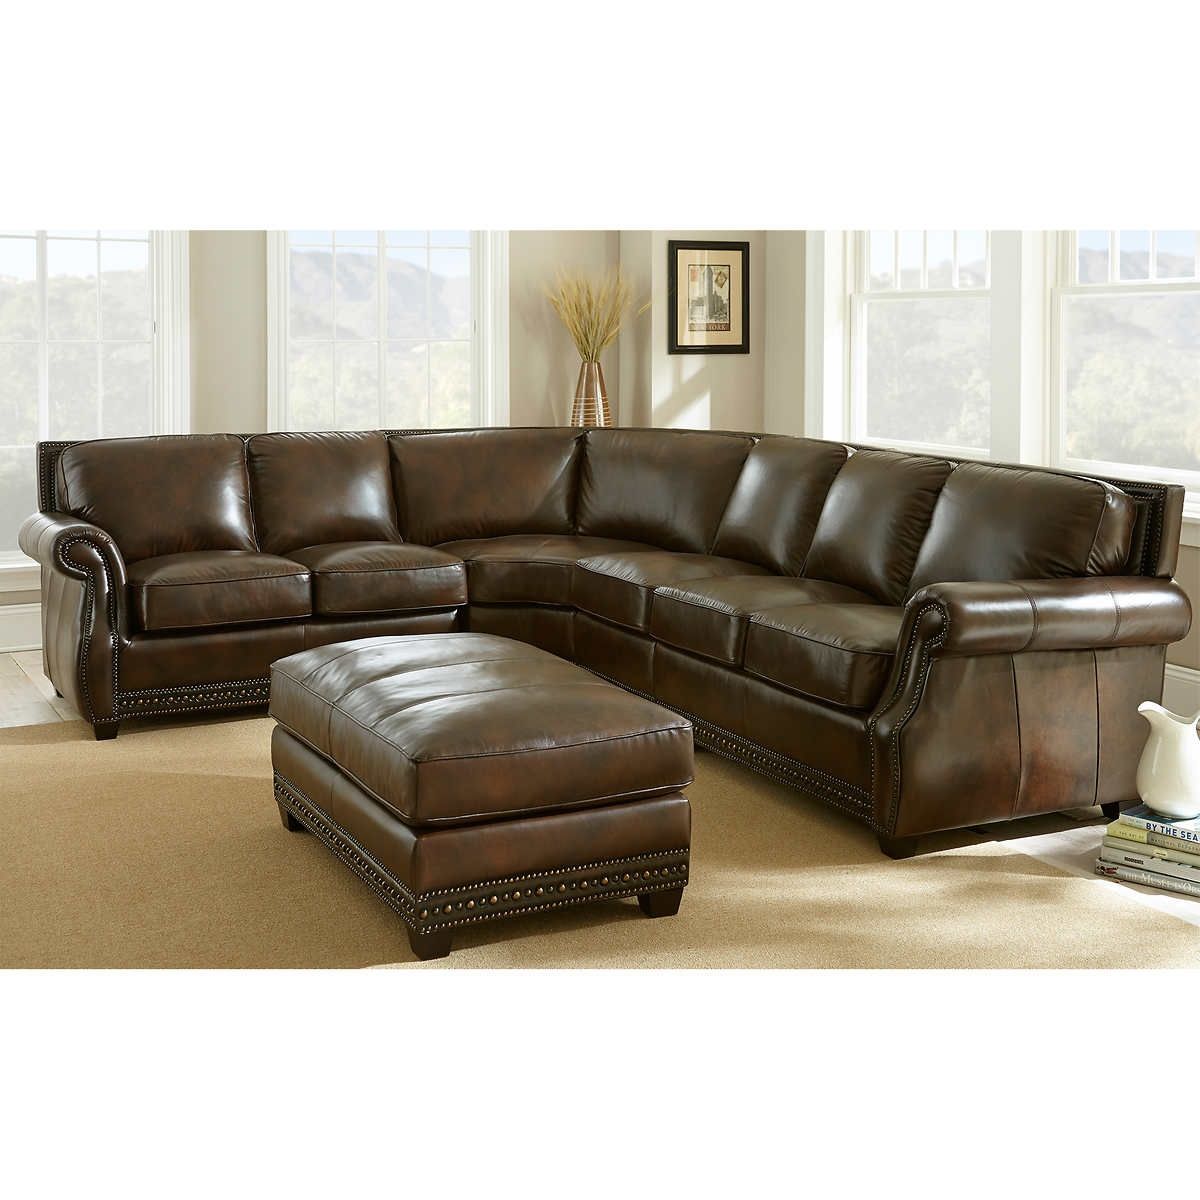 Broyhill Sectional Sofas On Sale Tags 49 Dreaded Broyhill With Regard To Broyhill Sectional Sofas (View 12 of 12)